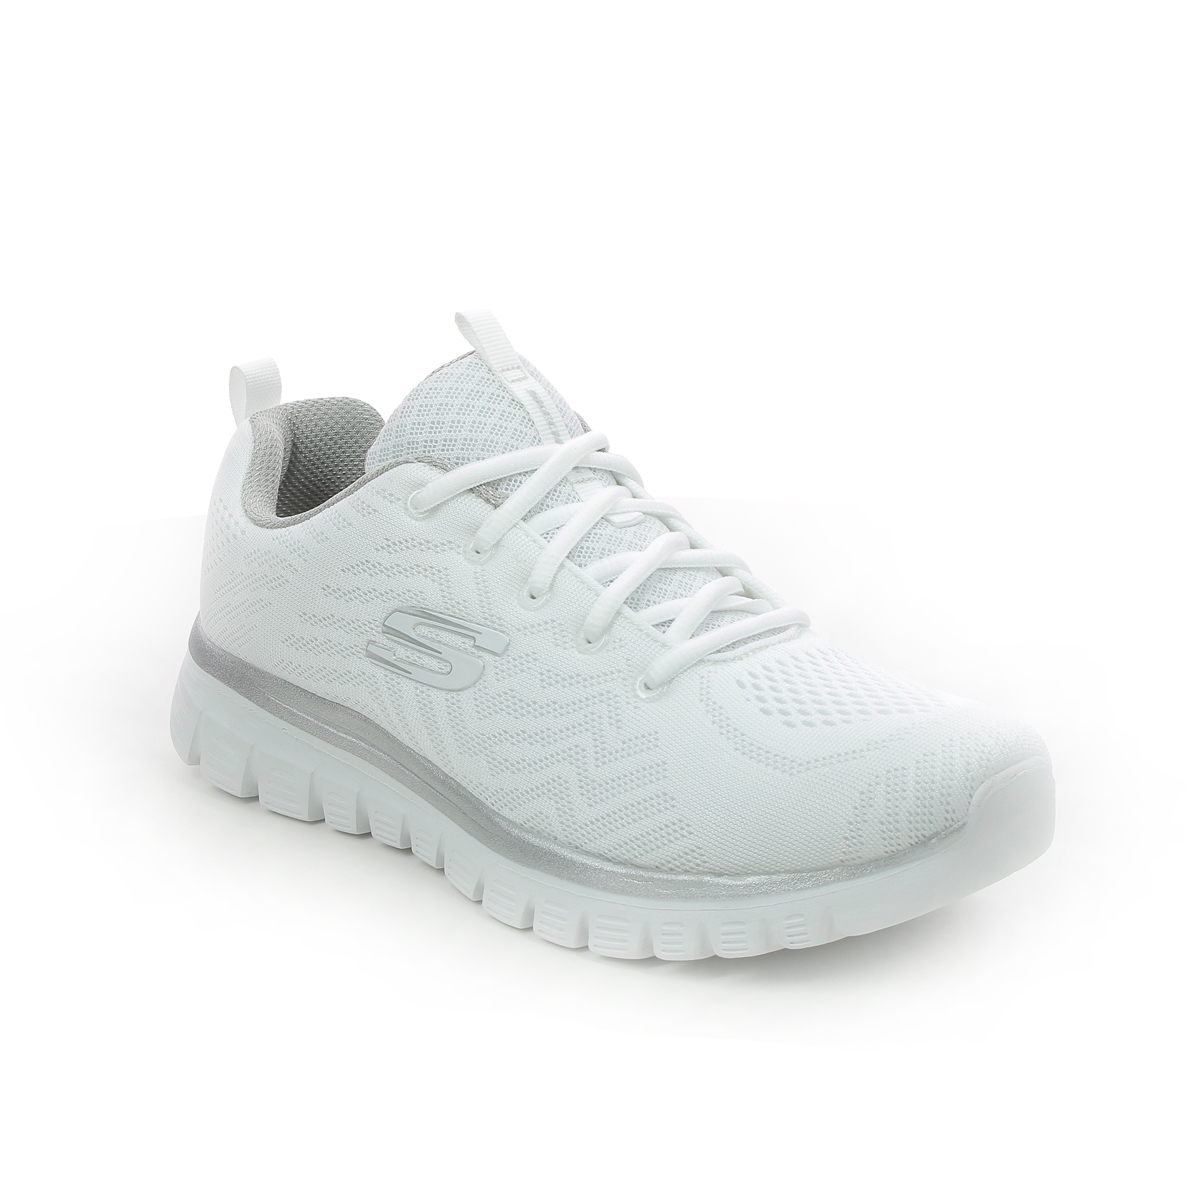 Skechers Get Connected White-Silver Womens Trainers 12615 In Size 8 In Plain White-Silver